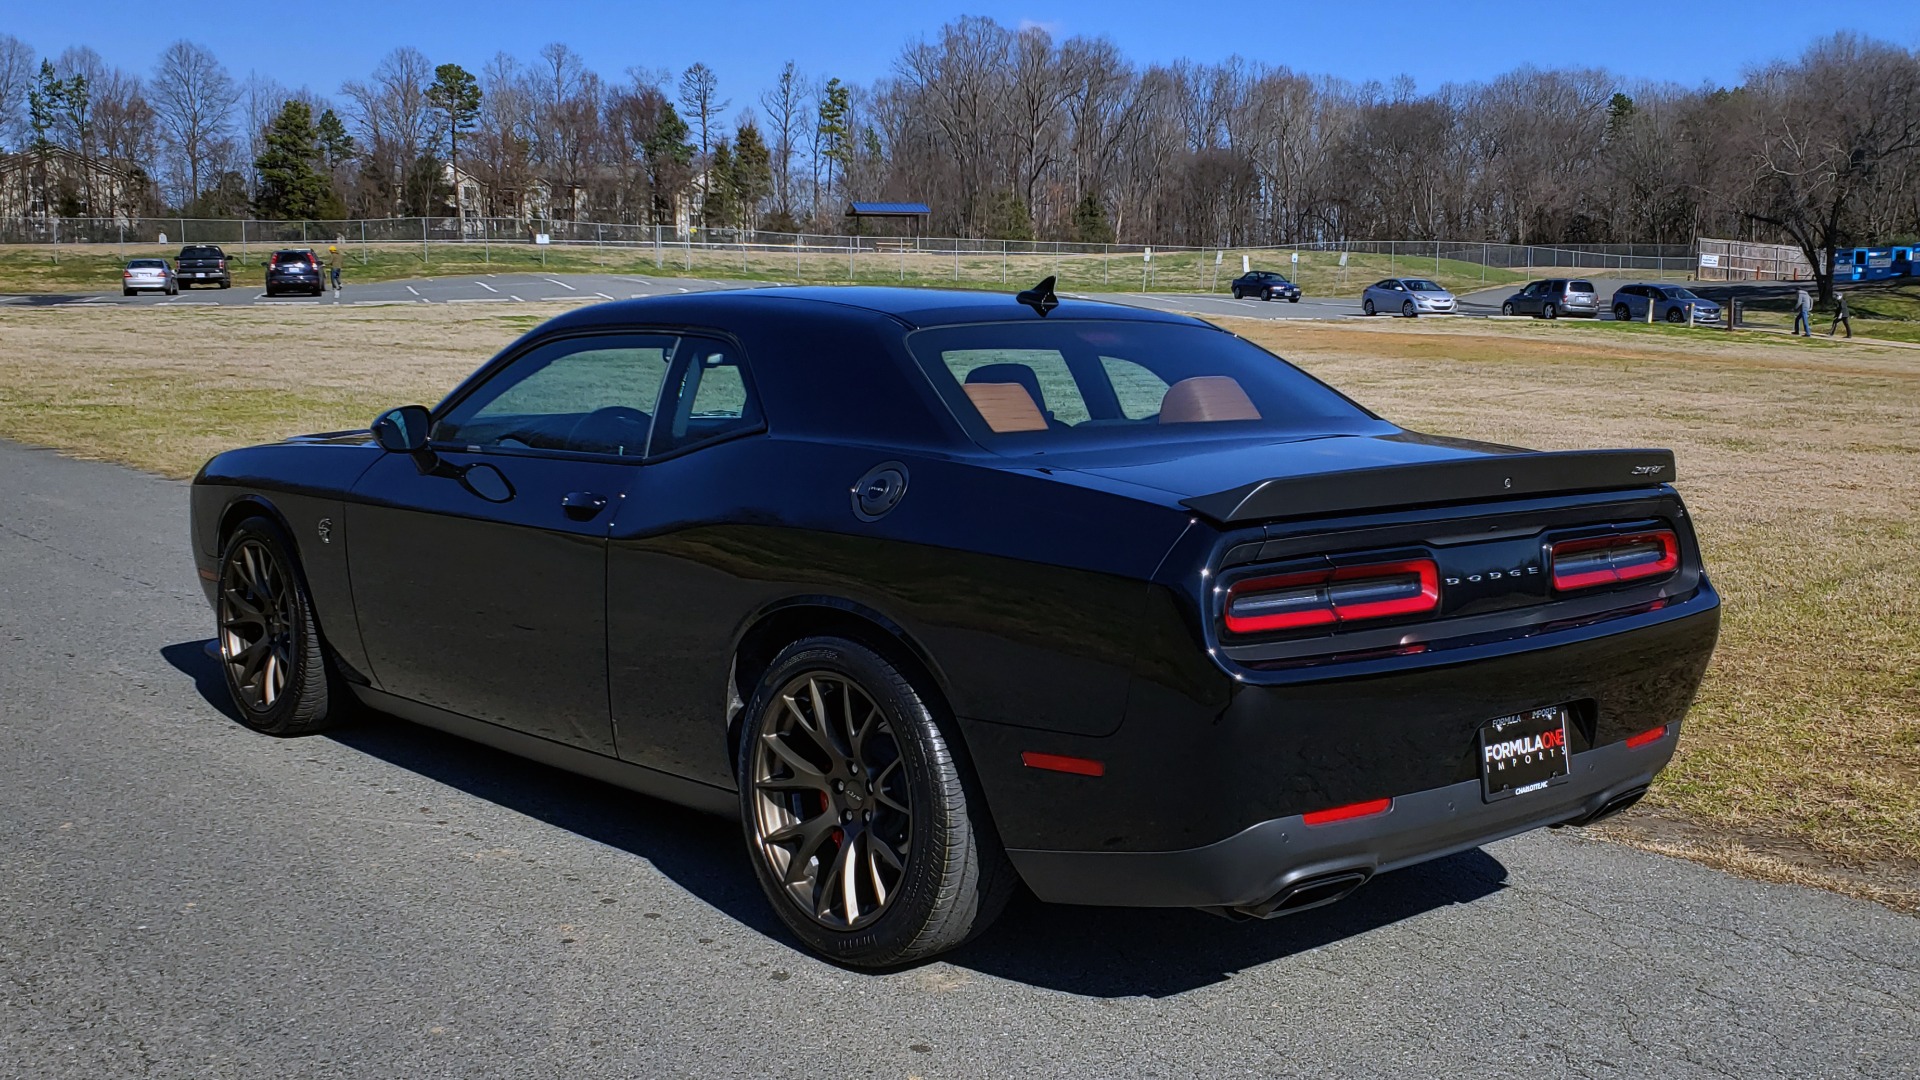 Used 2016 Dodge CHALLENGER SRT HELLCAT / NAV / SUNROOF / REARVIEW / BRASS MONKEY for sale Sold at Formula Imports in Charlotte NC 28227 4